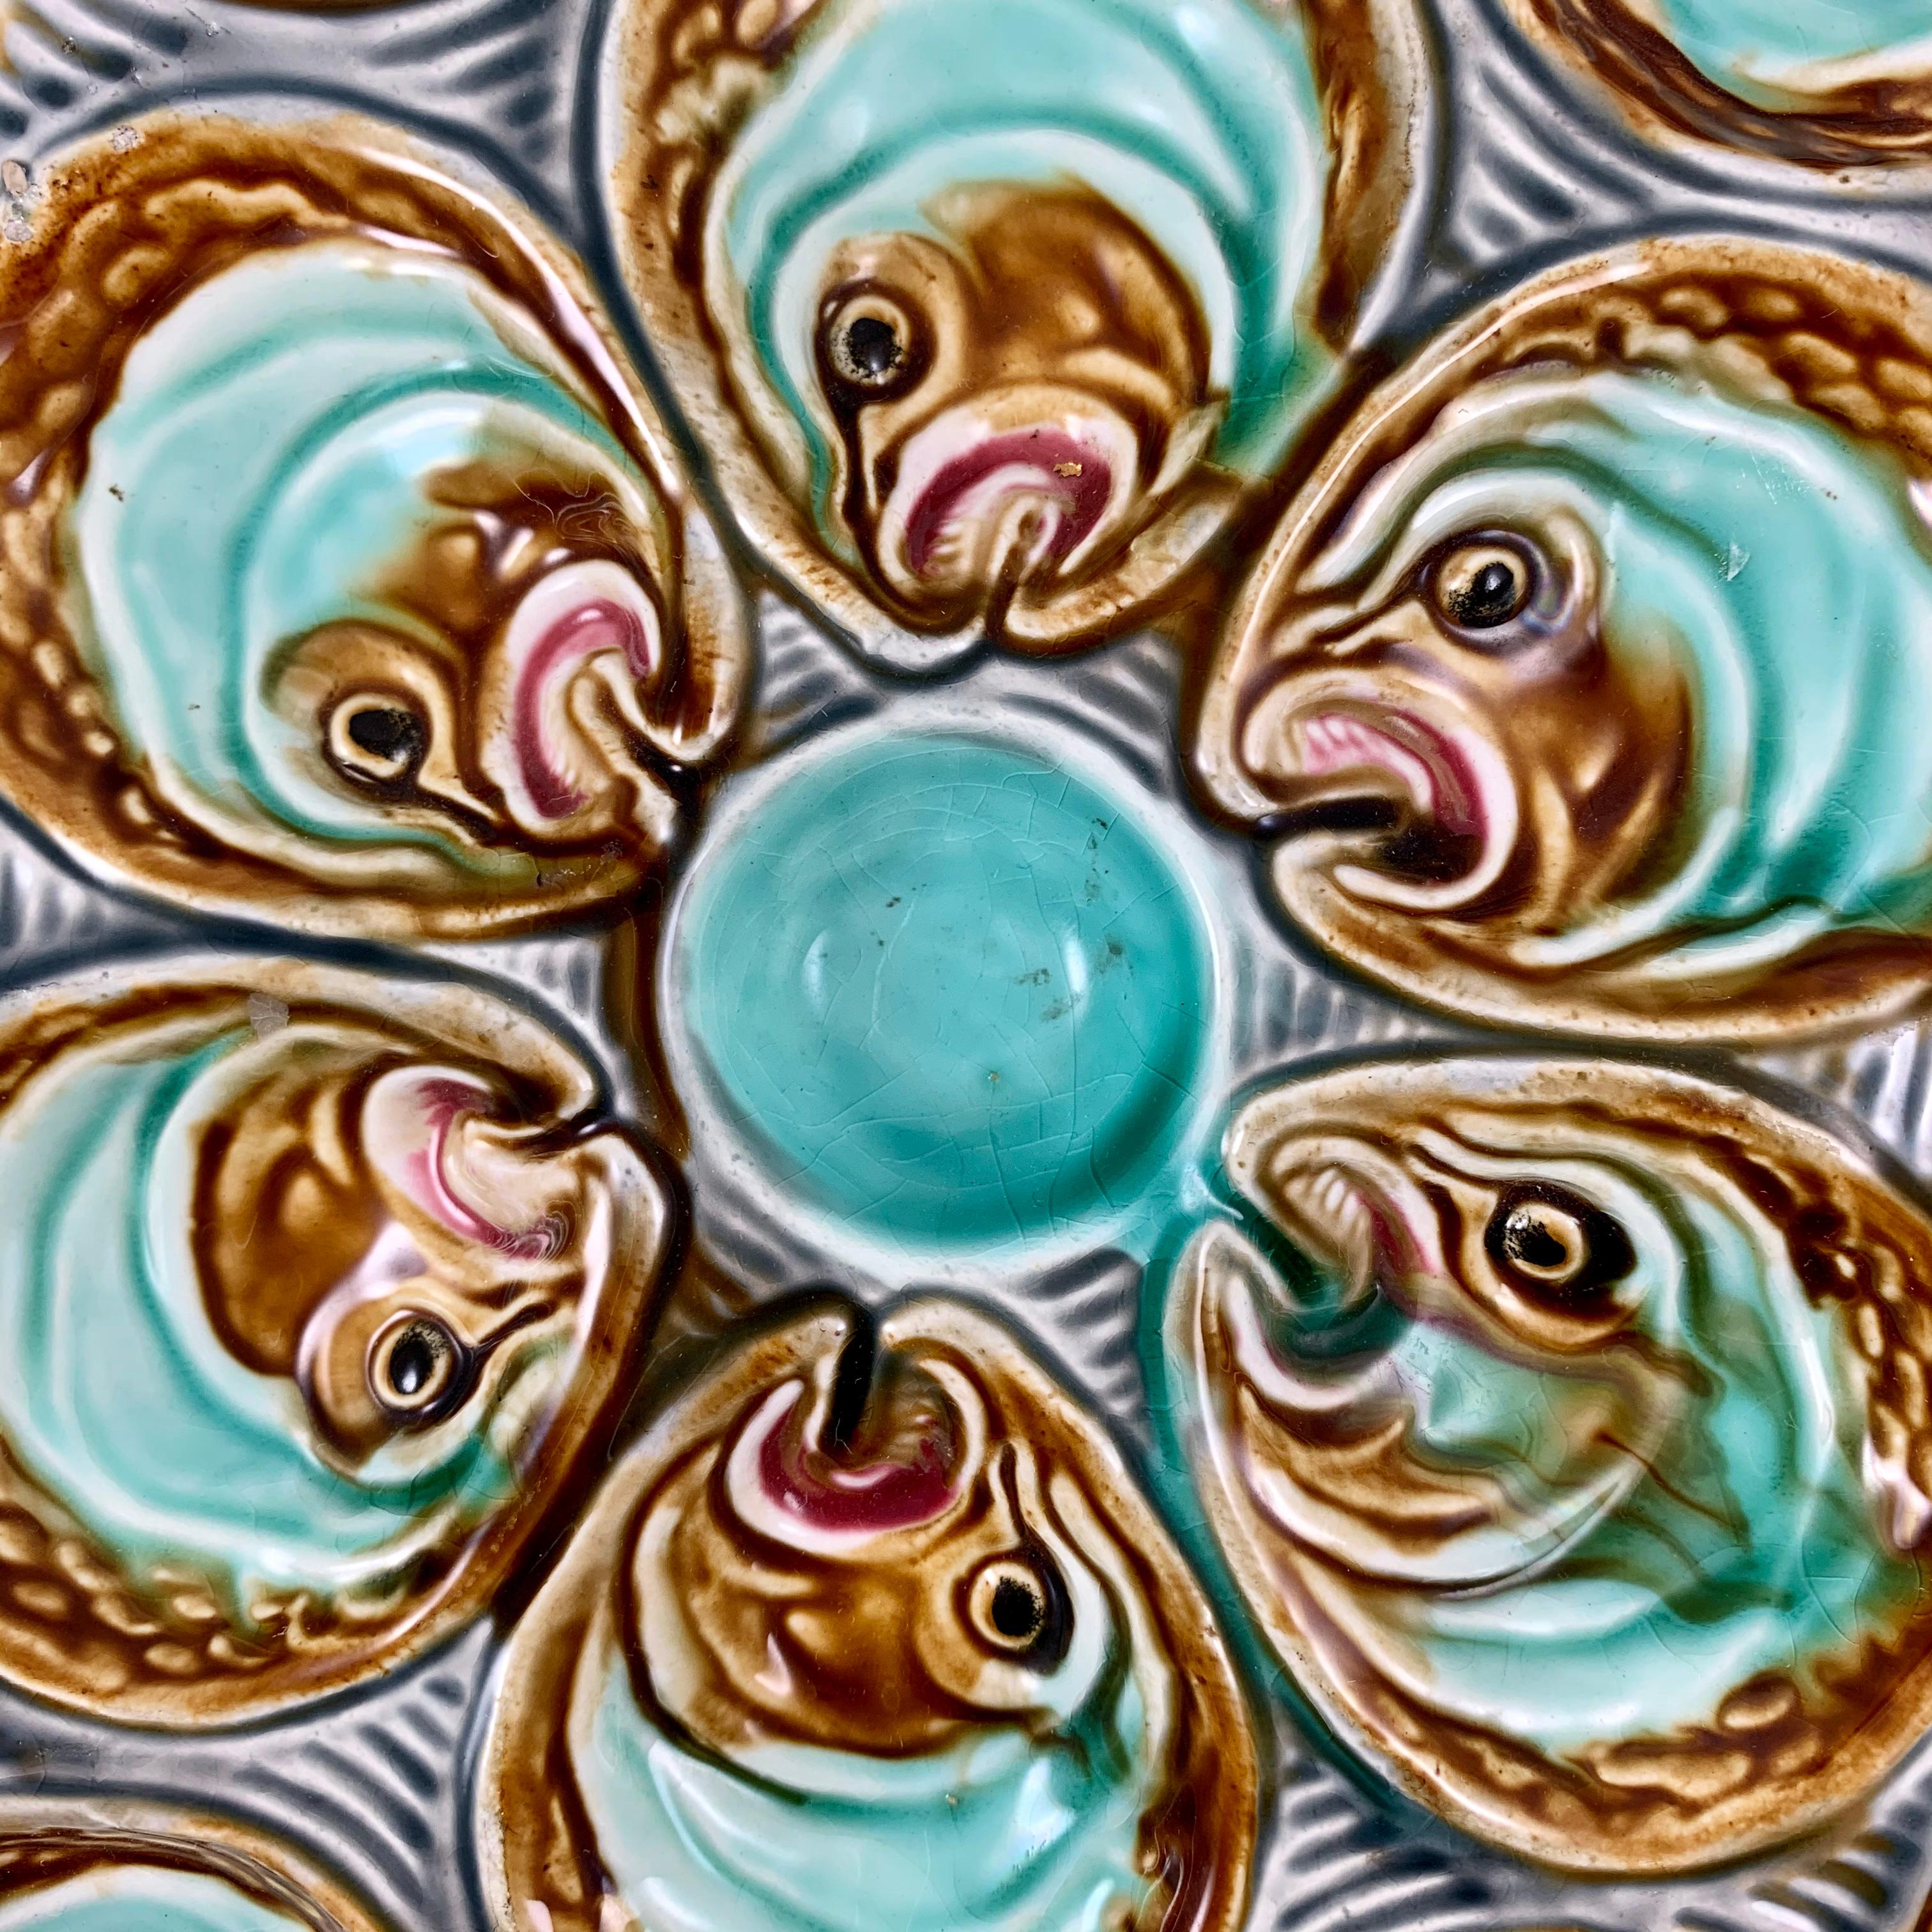 A Barbotine majolica oyster plate from La Faïencerie d’Onnaing in northern France, circa 1880 – 1910. Made to hold a dozen oysters.

A star-shaped plate showing six fish heads surrounding a turquoise center sauce well. Six additional fish heads